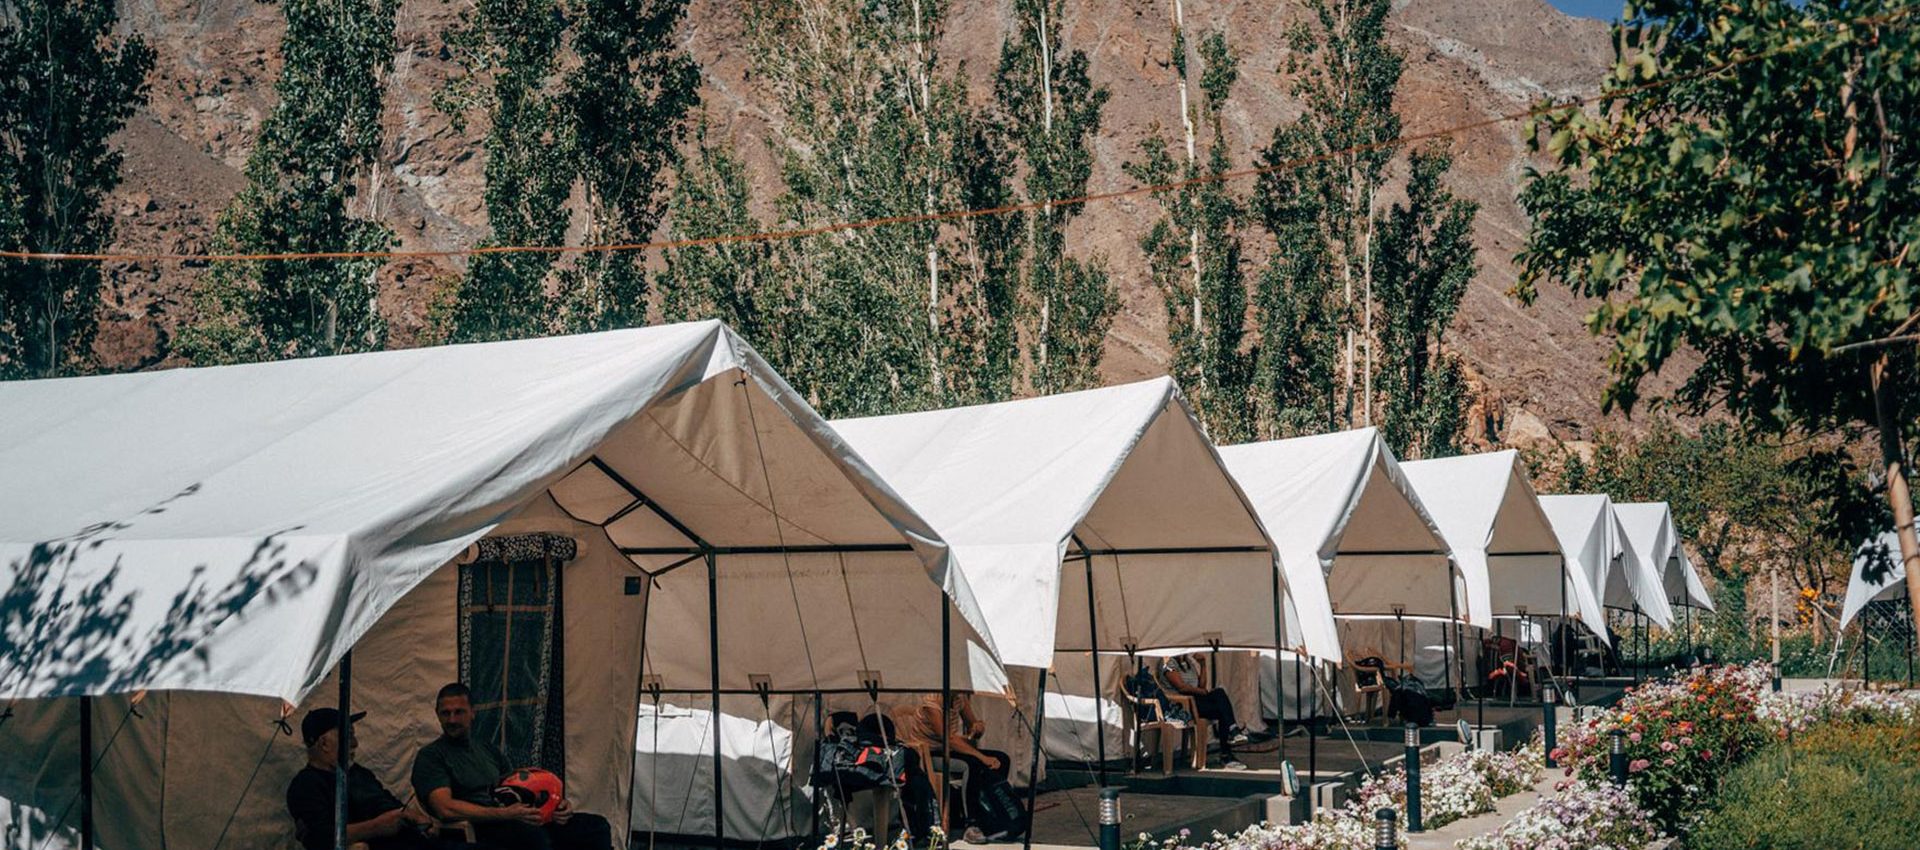 The best way to spend the night is in a glamping style fully equipped tent camp in the heart of the Himalayan mountains.